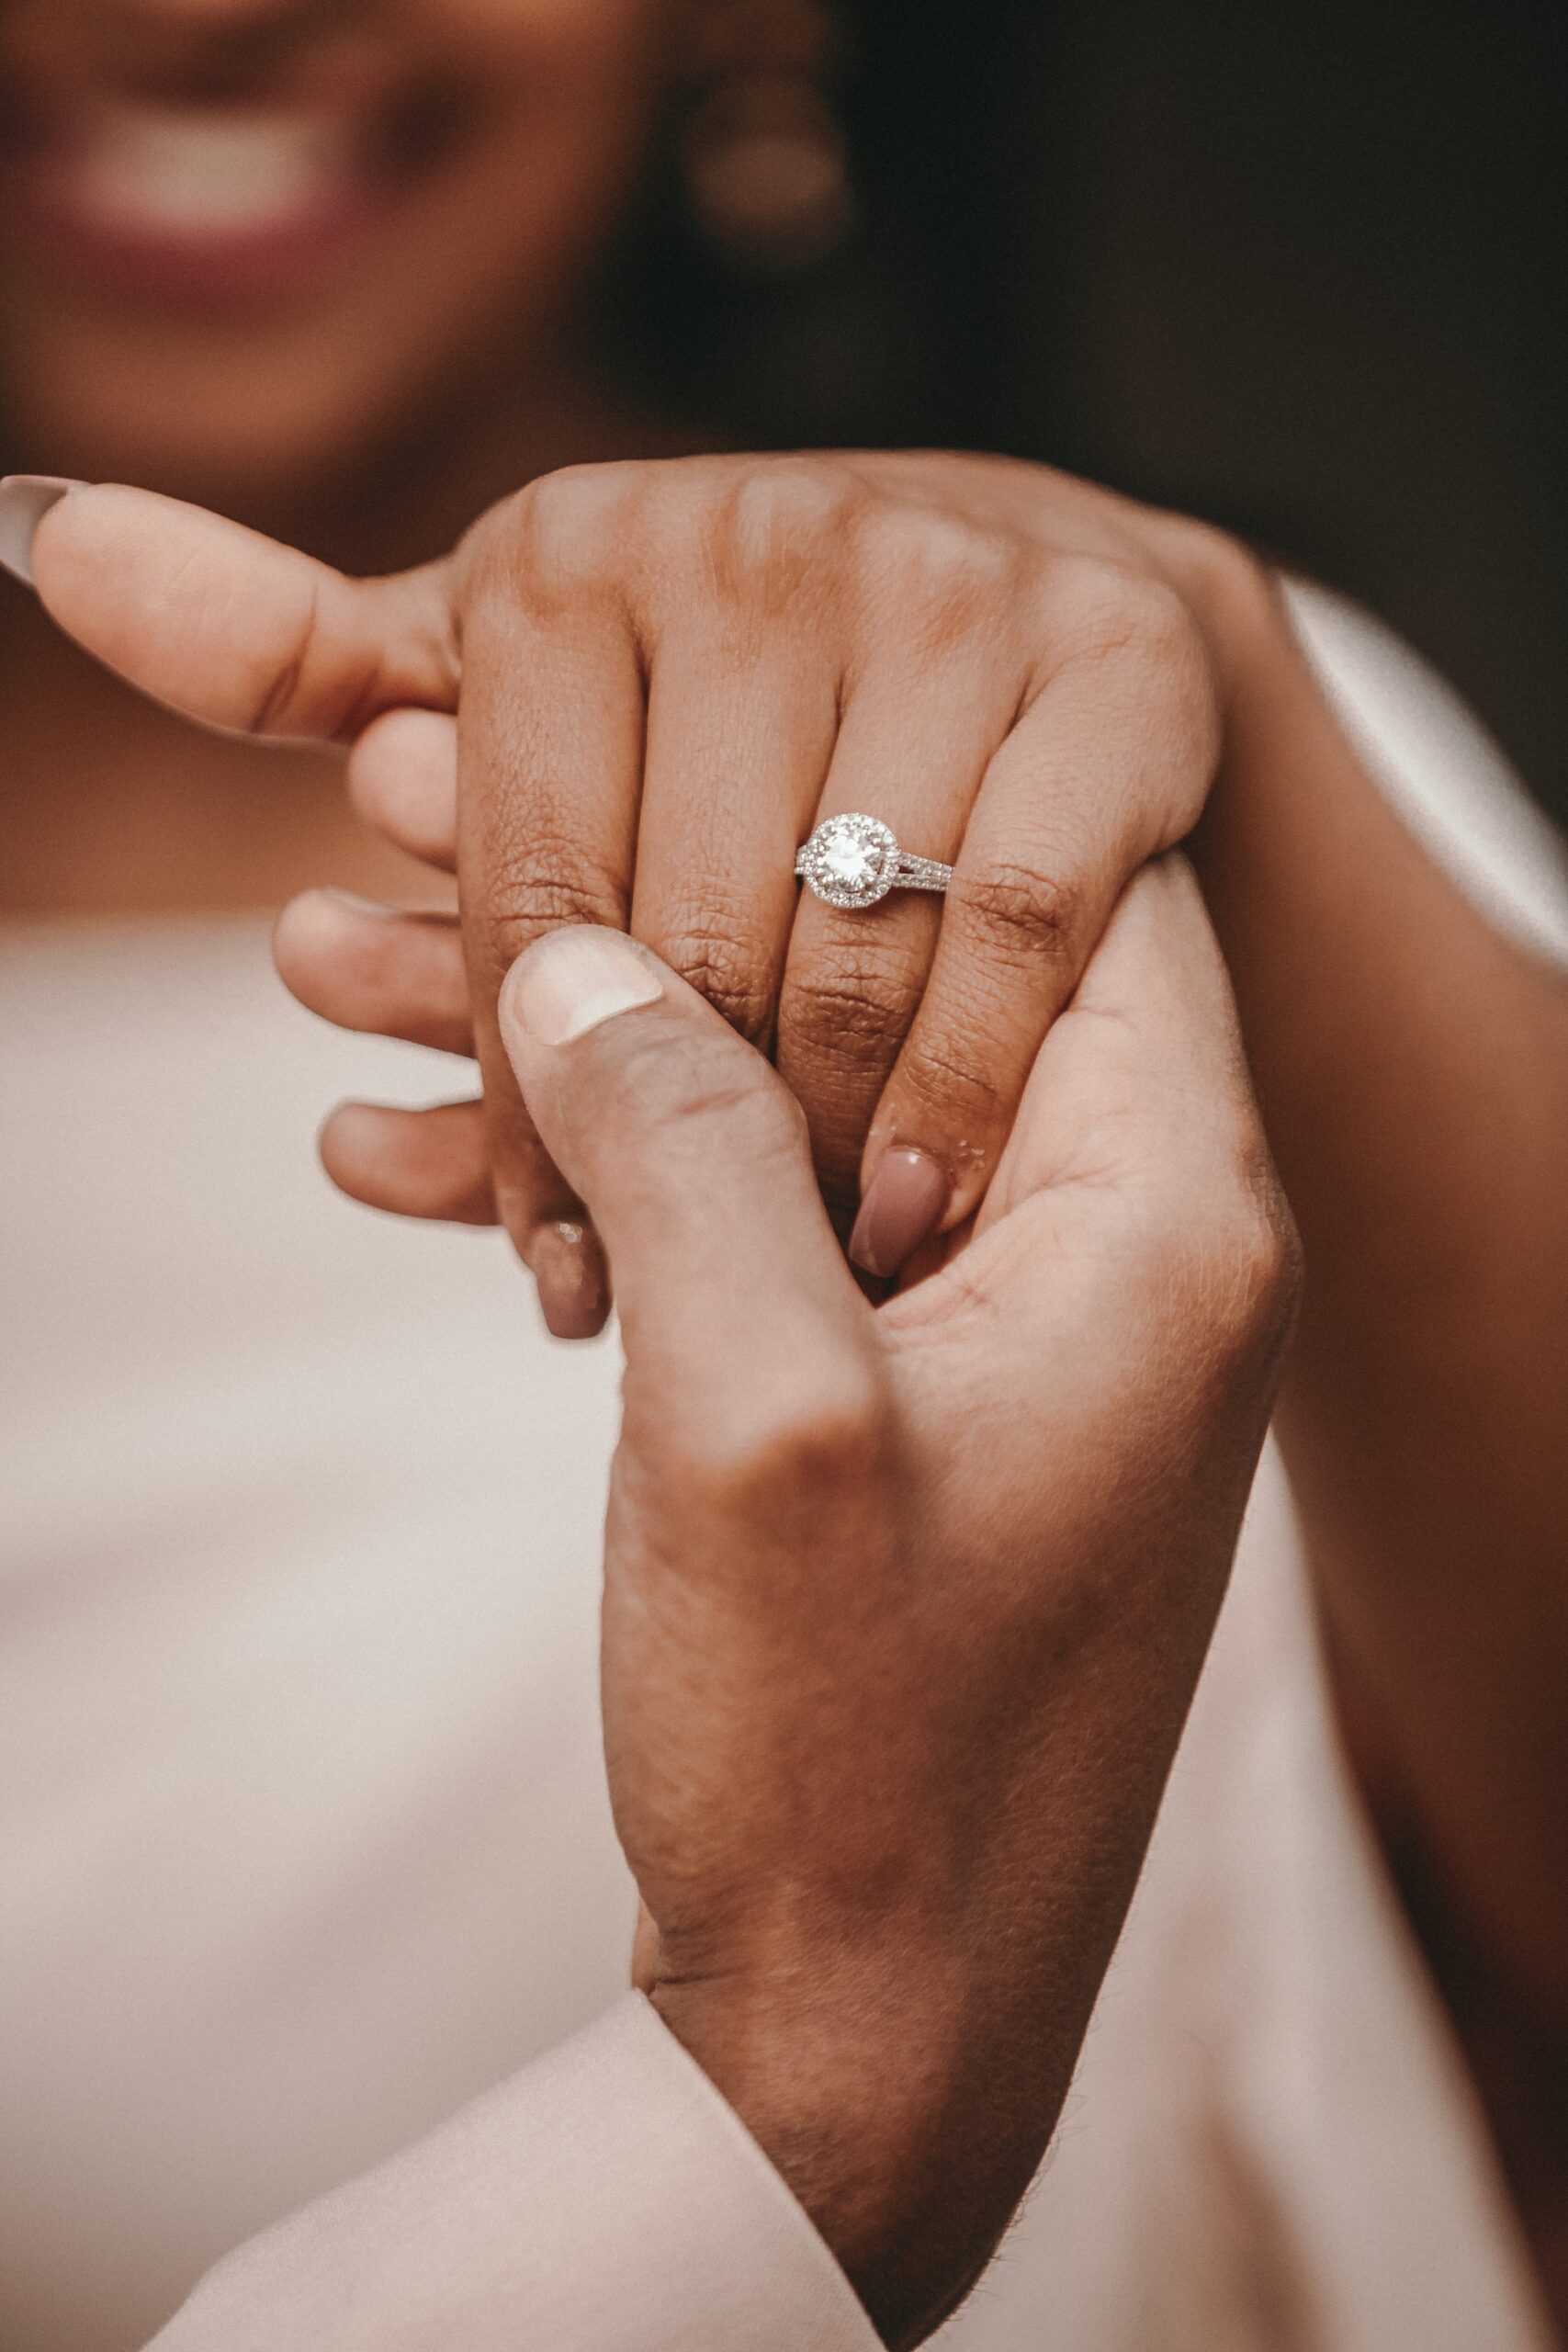 Couple's hands showing off engagement ring